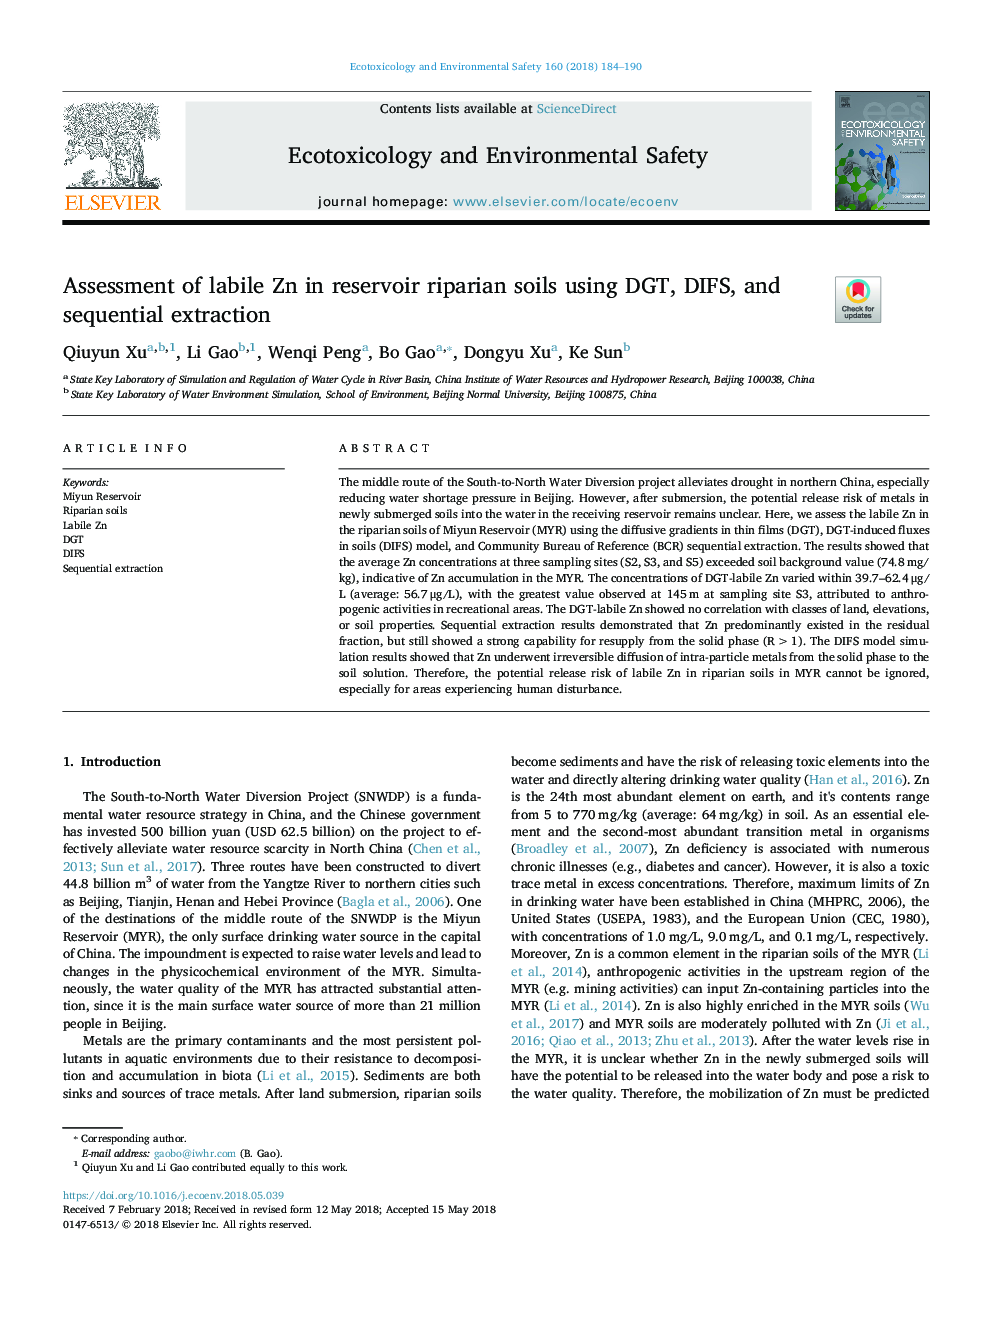 Assessment of labile Zn in reservoir riparian soils using DGT, DIFS, and sequential extraction